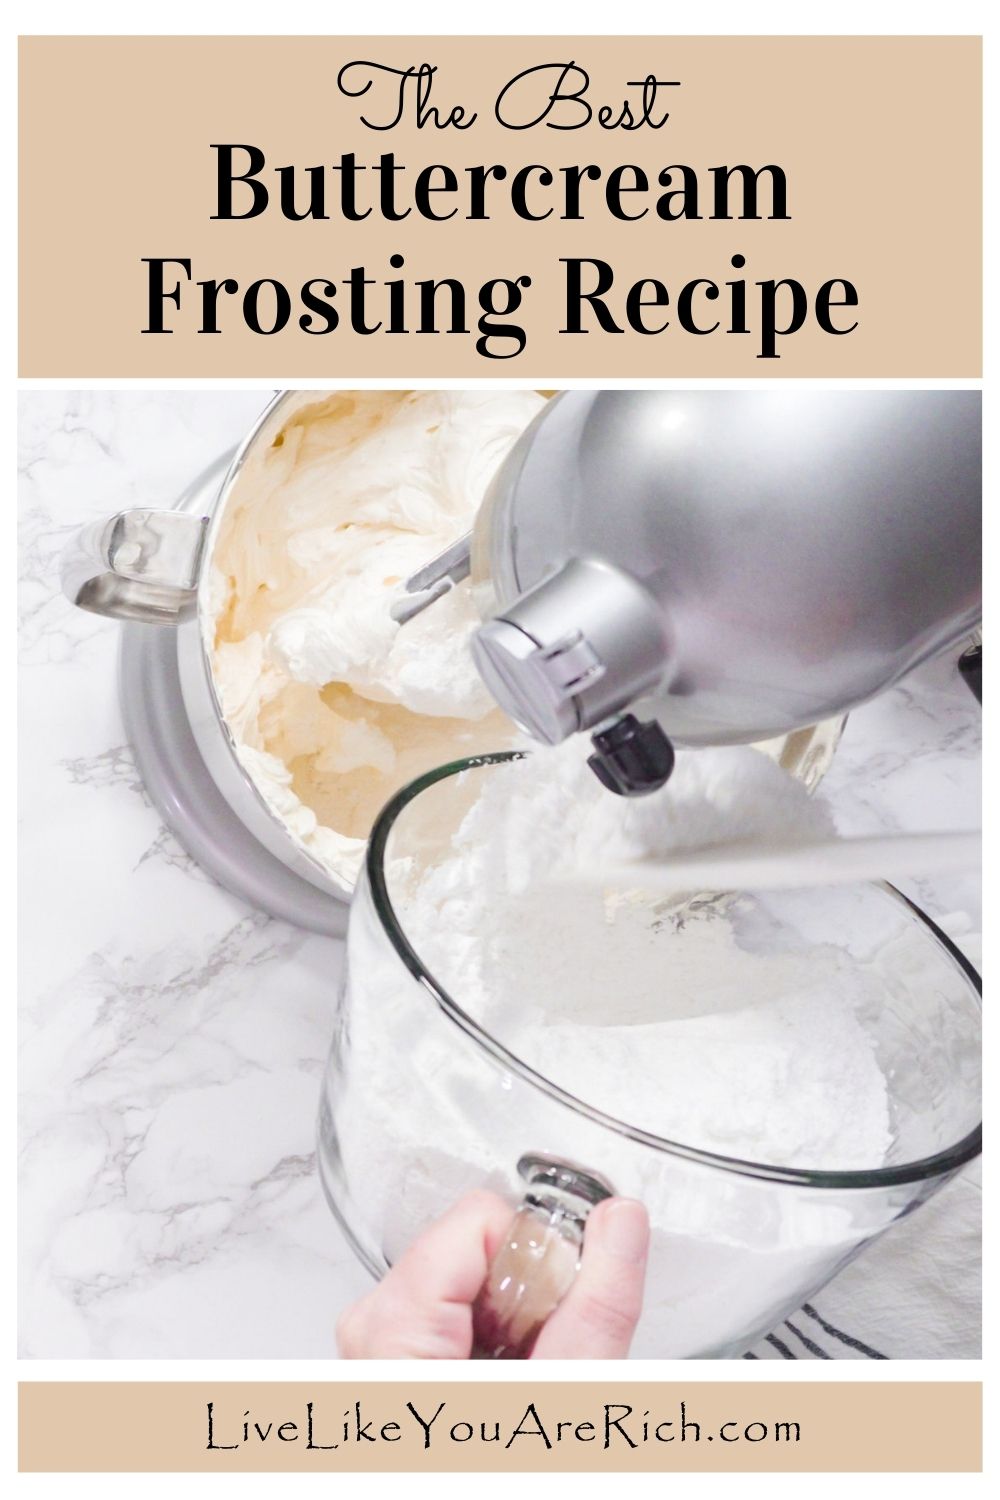 The best buttercream frosting recipe